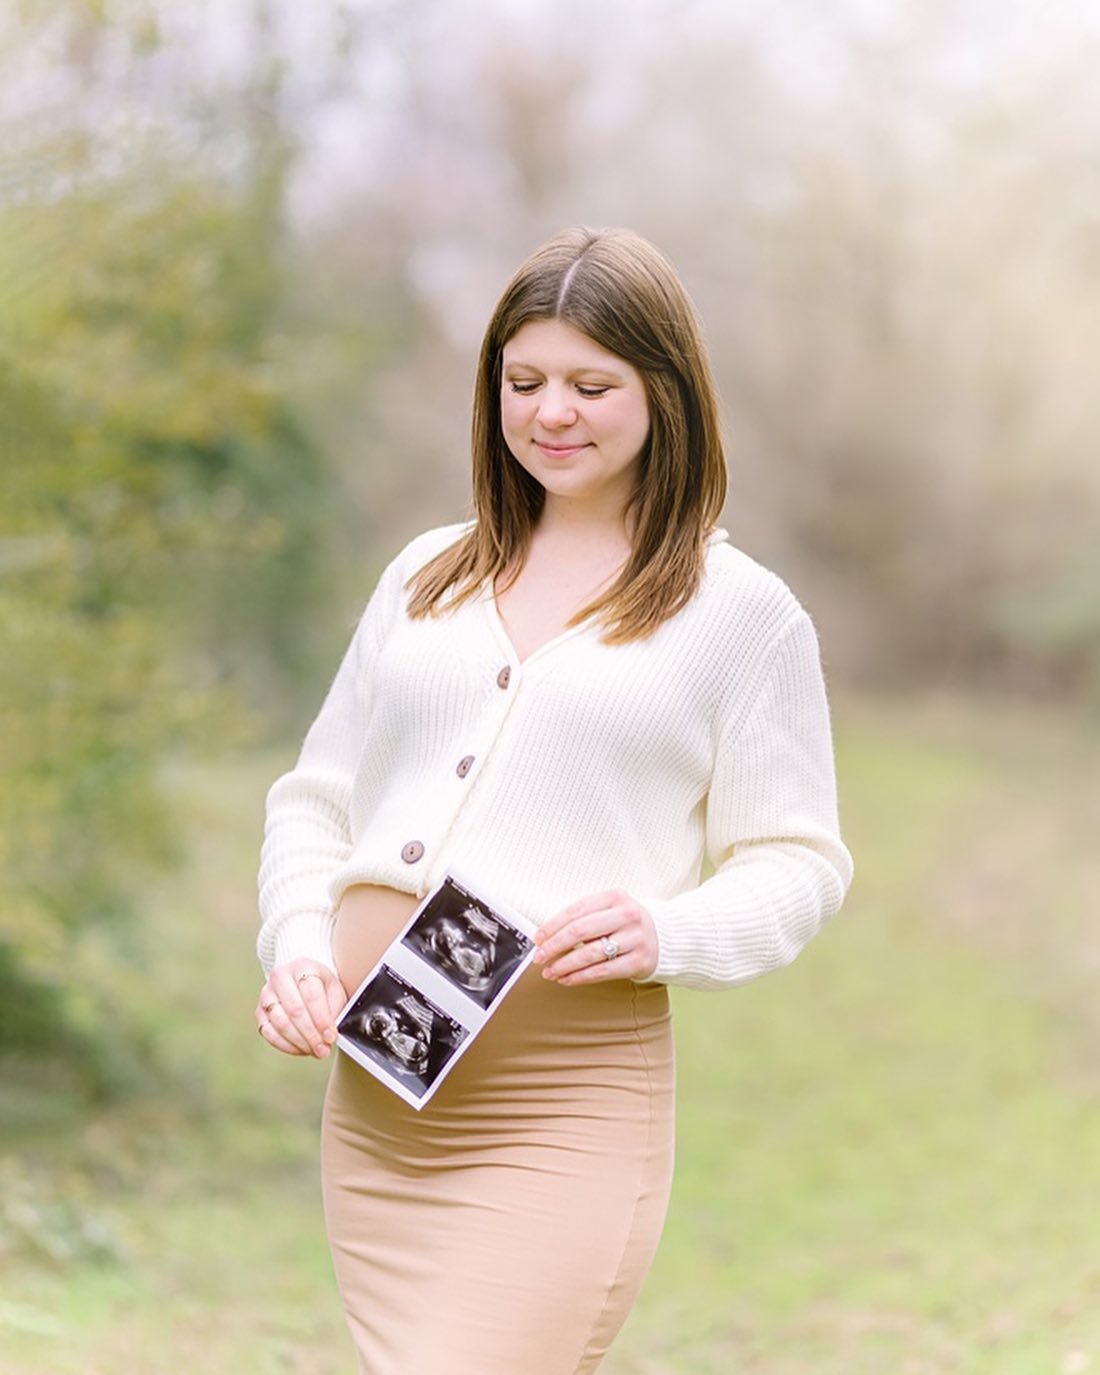 📷✨ &ldquo;My Recipe for a Successful Maternity Photo Session&rdquo; ✨

As a photographer specializing in capturing the magic of maternity, I&rsquo;ve perfected a recipe for creating timeless and beautiful memories. Here are the essential ingredients